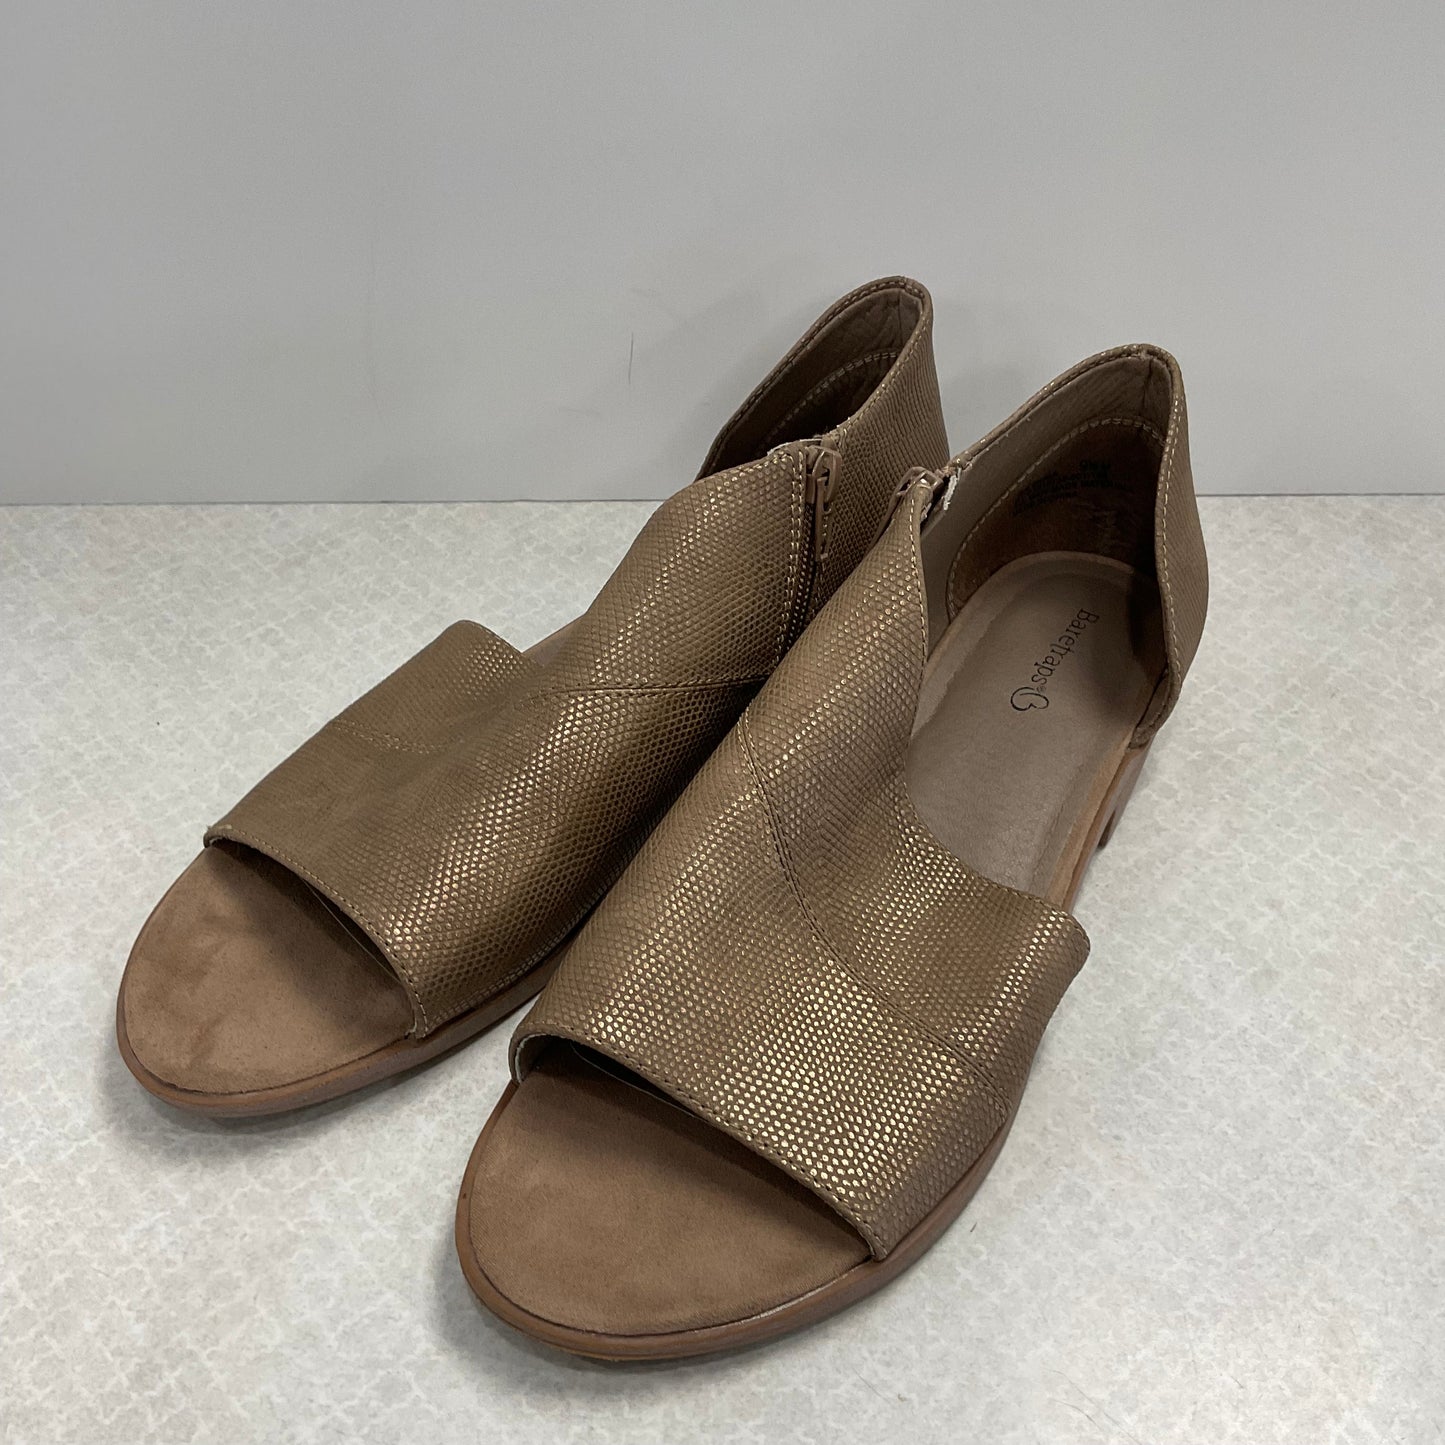 Shoes Flats By Bare Traps  Size: 9.5